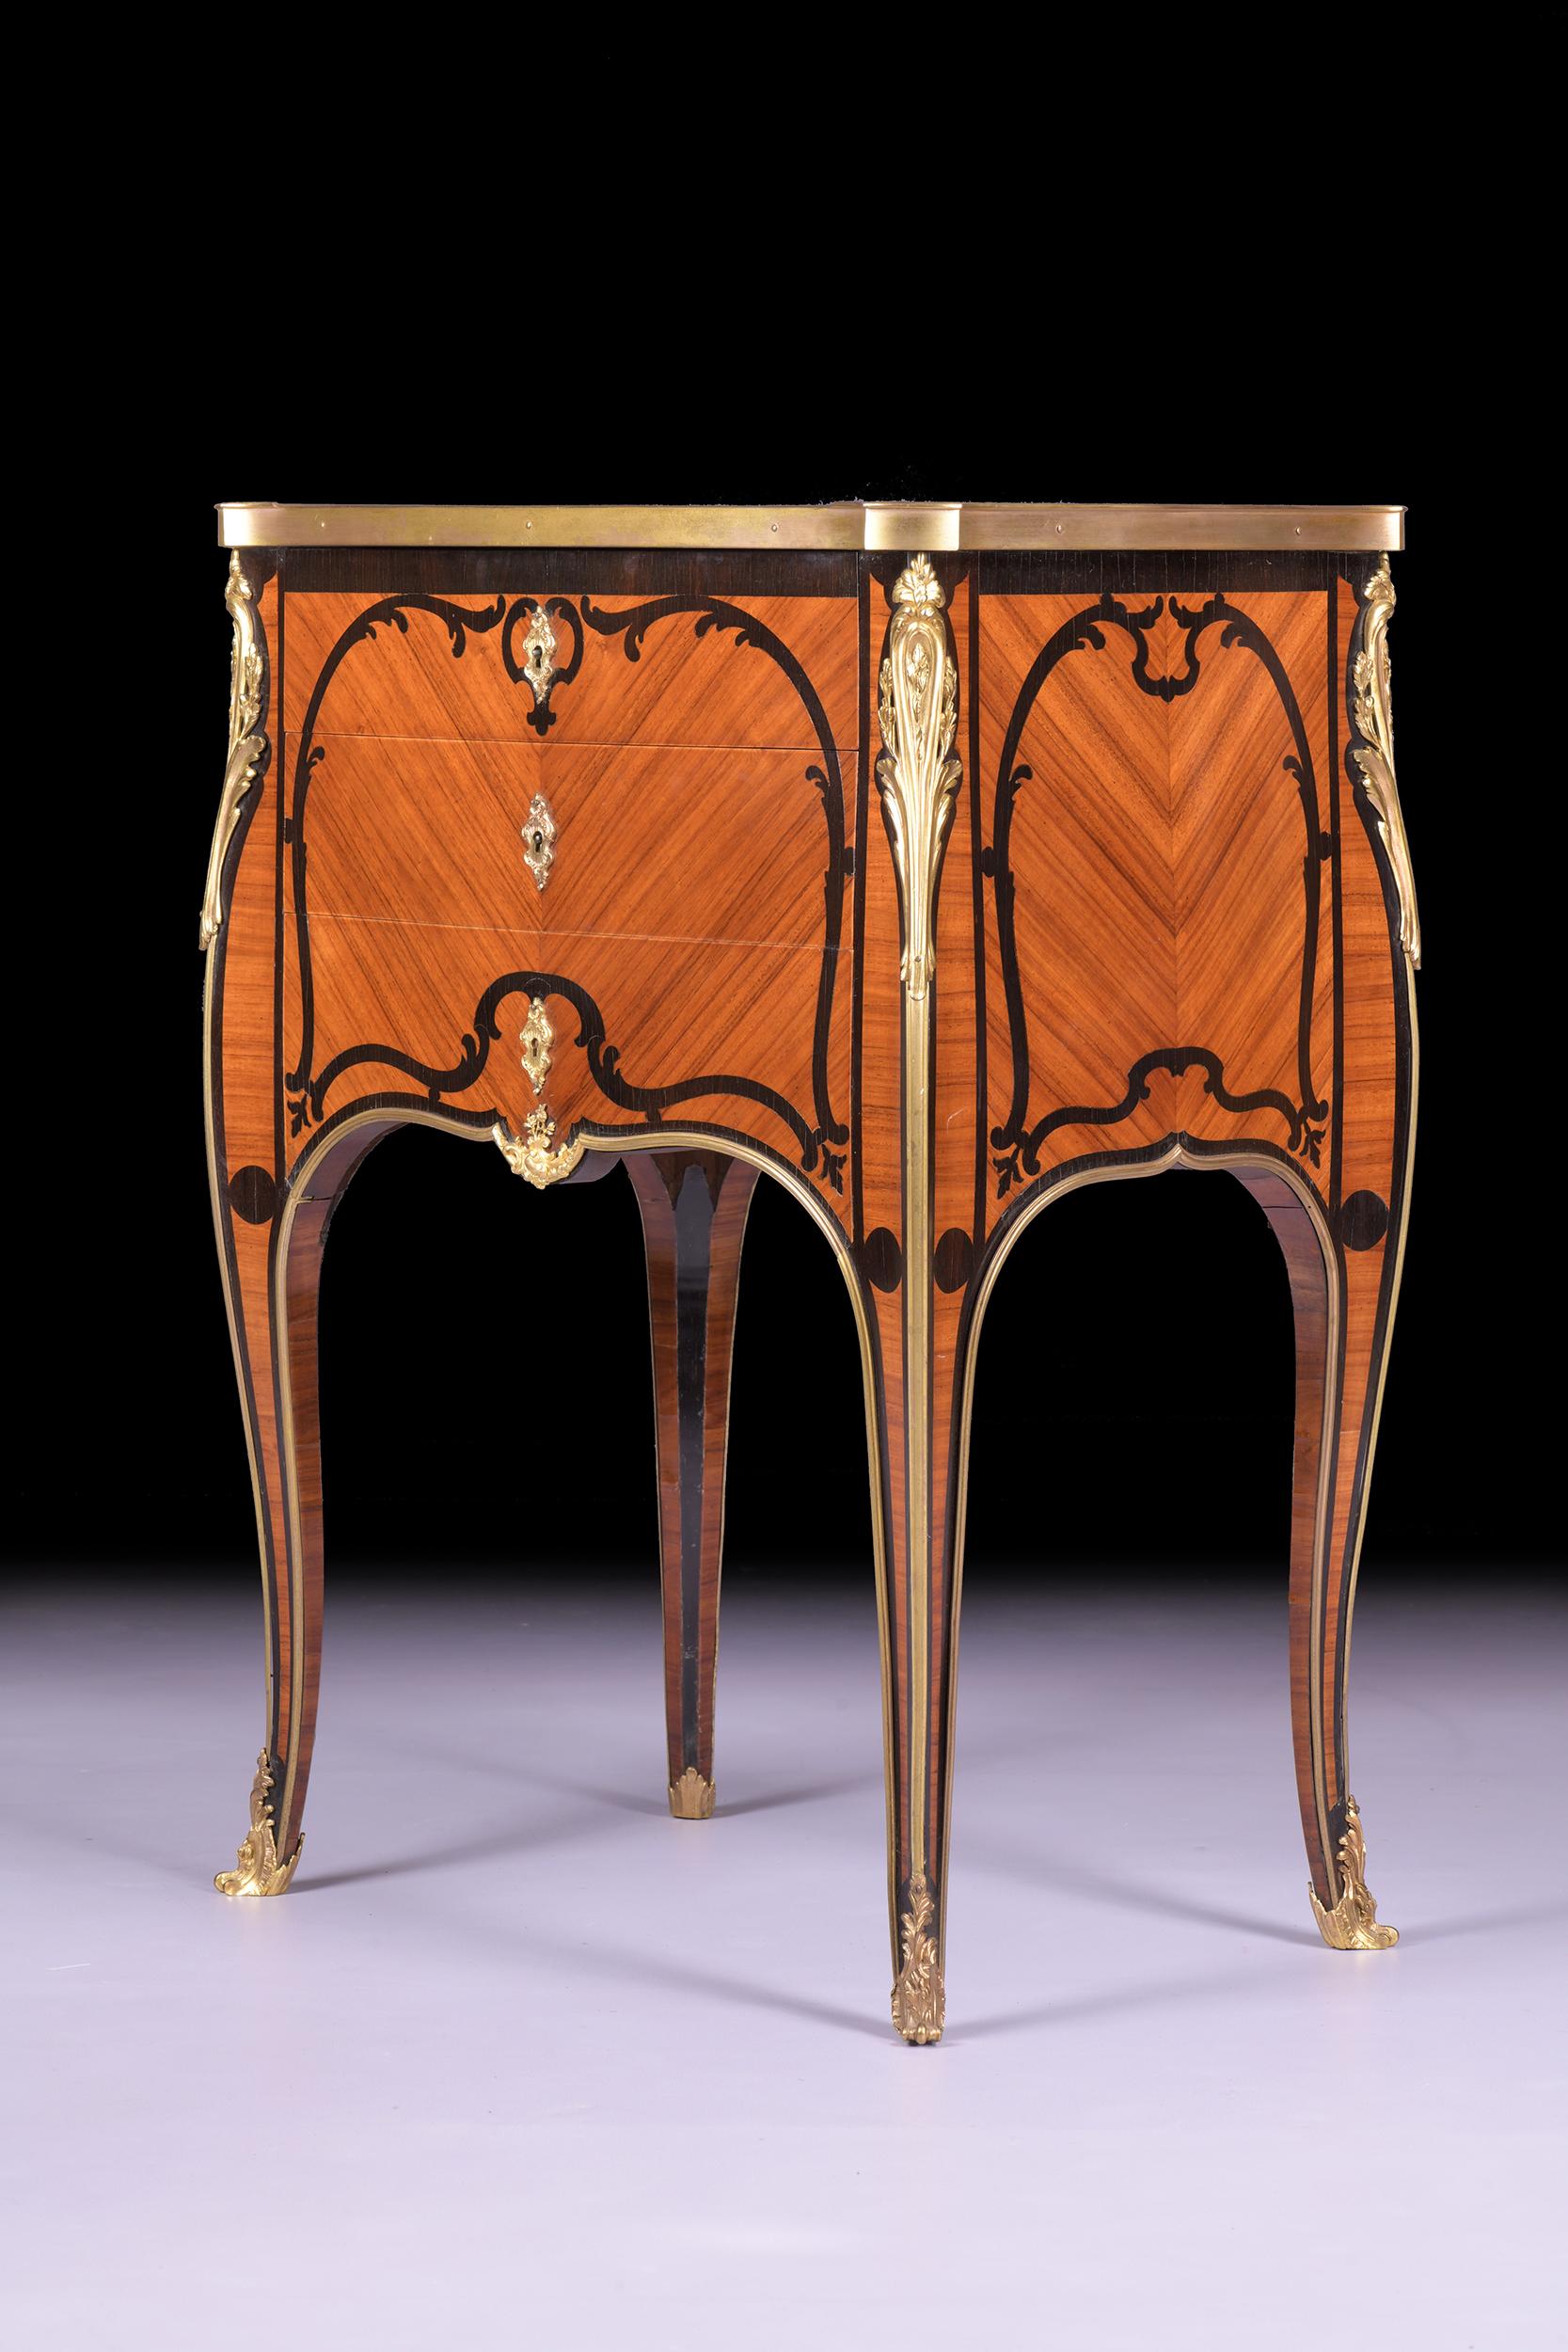 A very fine French Tulipwood marquetry and ormolu mounted commode of neat proportions, of compact rectangular shape, with out set corners inlaid with floral sprays, fitted with three graduated drawers, on slender cabriole legs. 

Circa